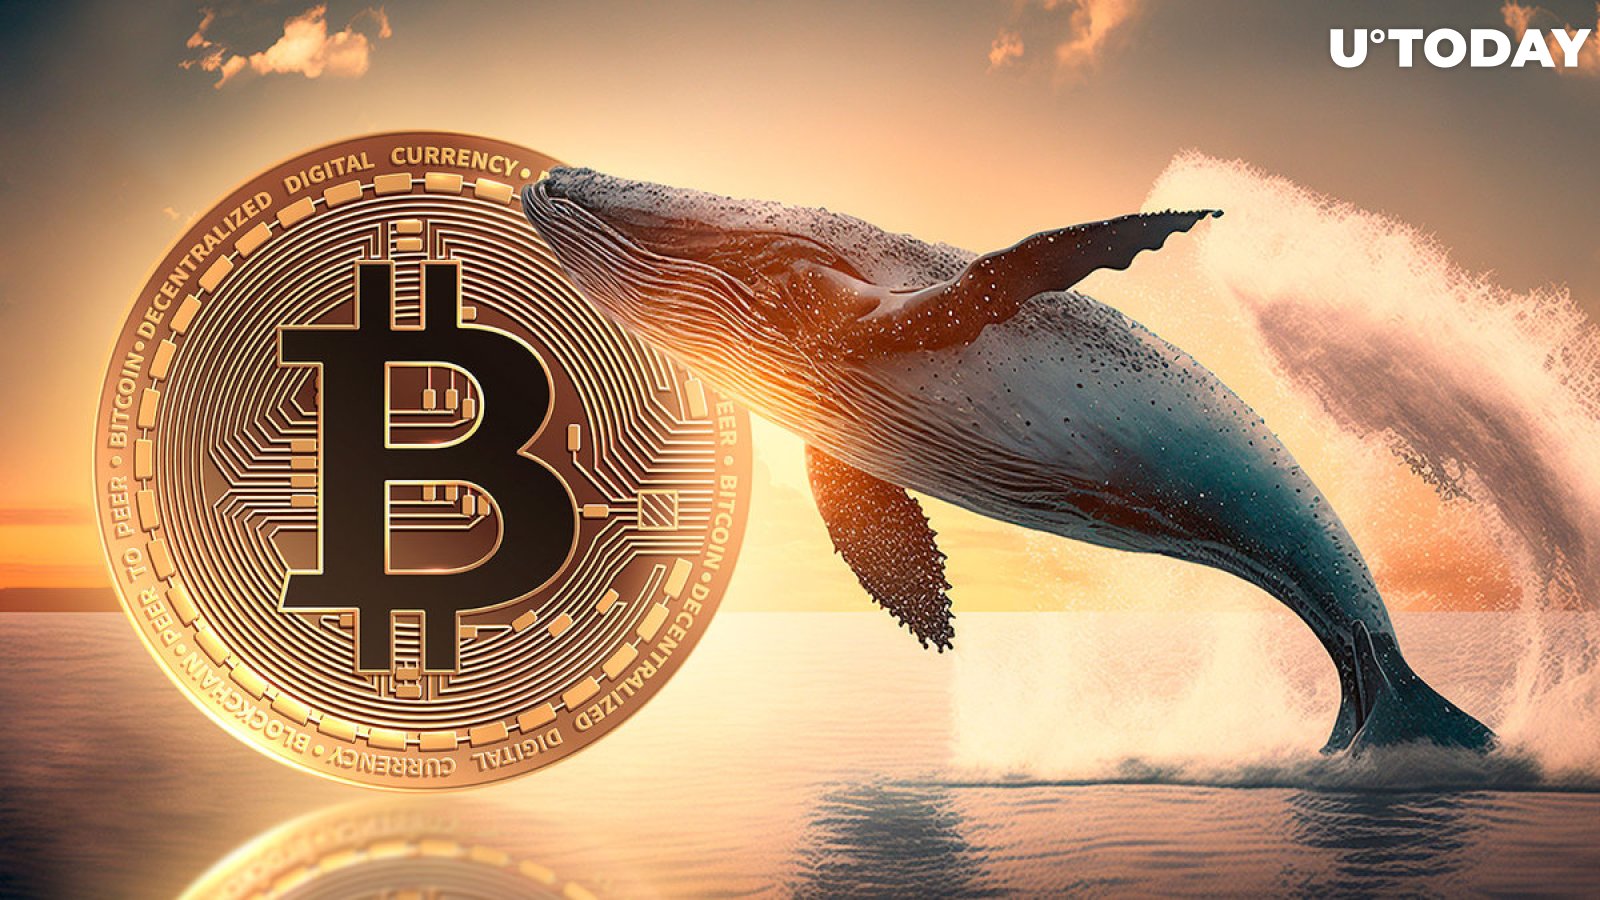 Mysterious whales suddenly move millions of dollars in Bitcoin after being halved